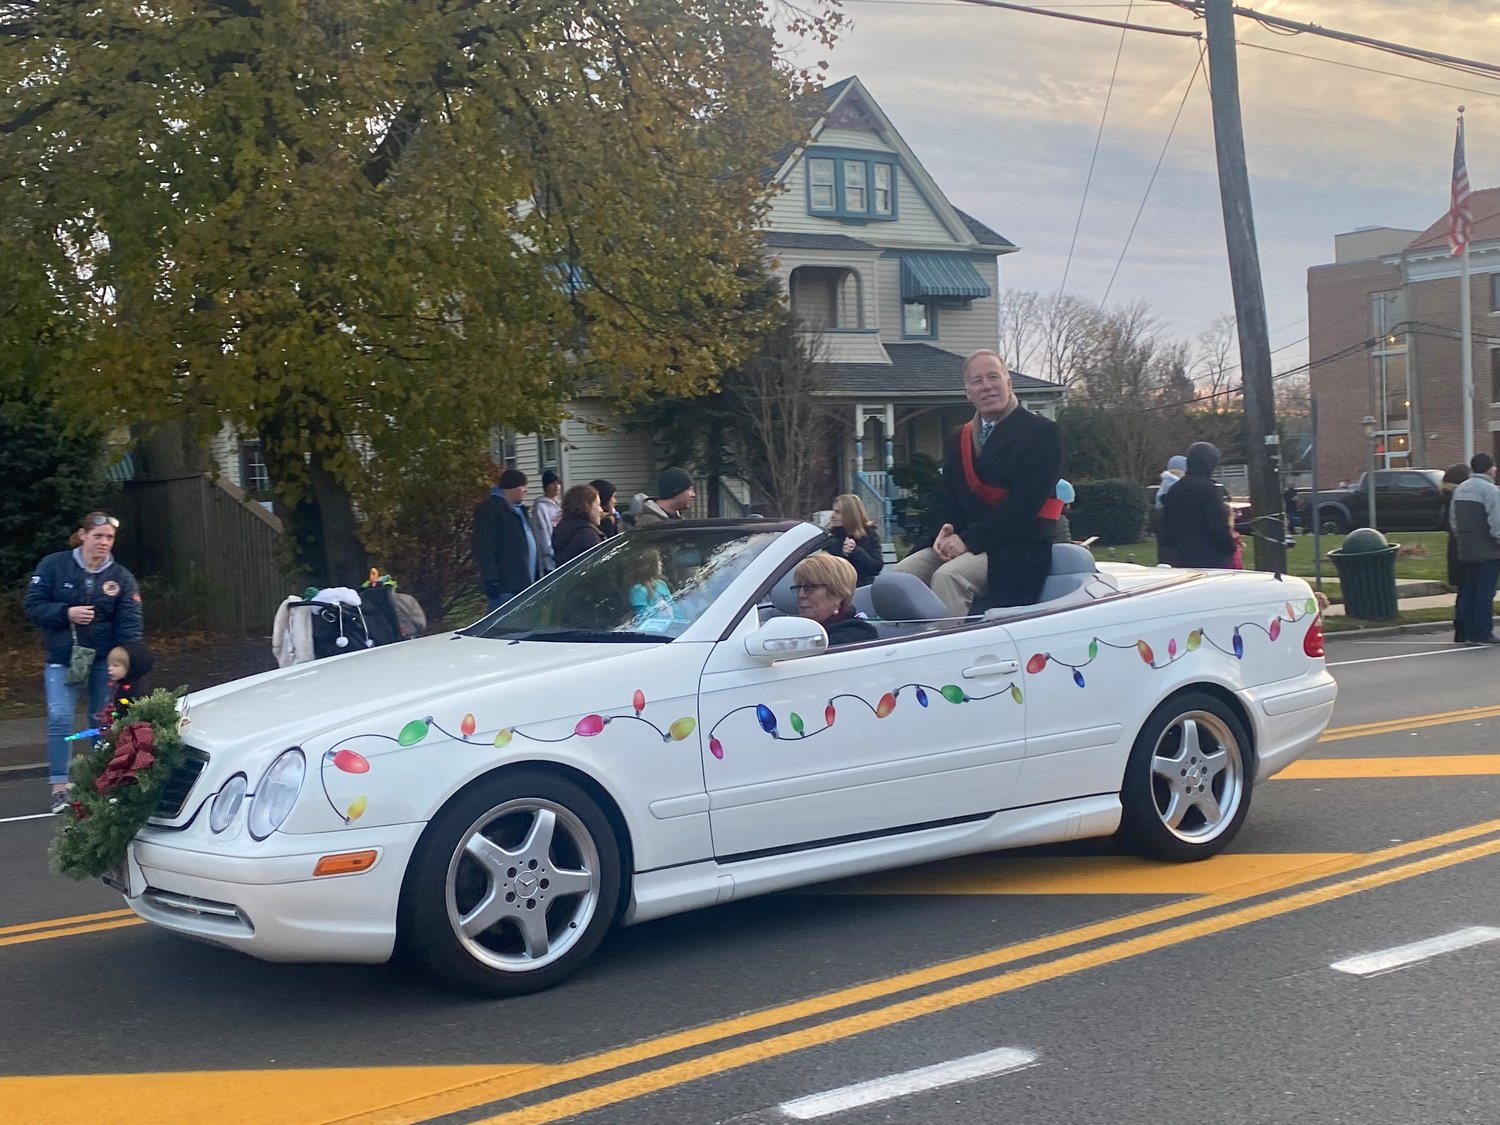 Suffolk County Legis. Tom Cilmi was surprised with the honor of being the parade’s grand marshal earlier in the day.